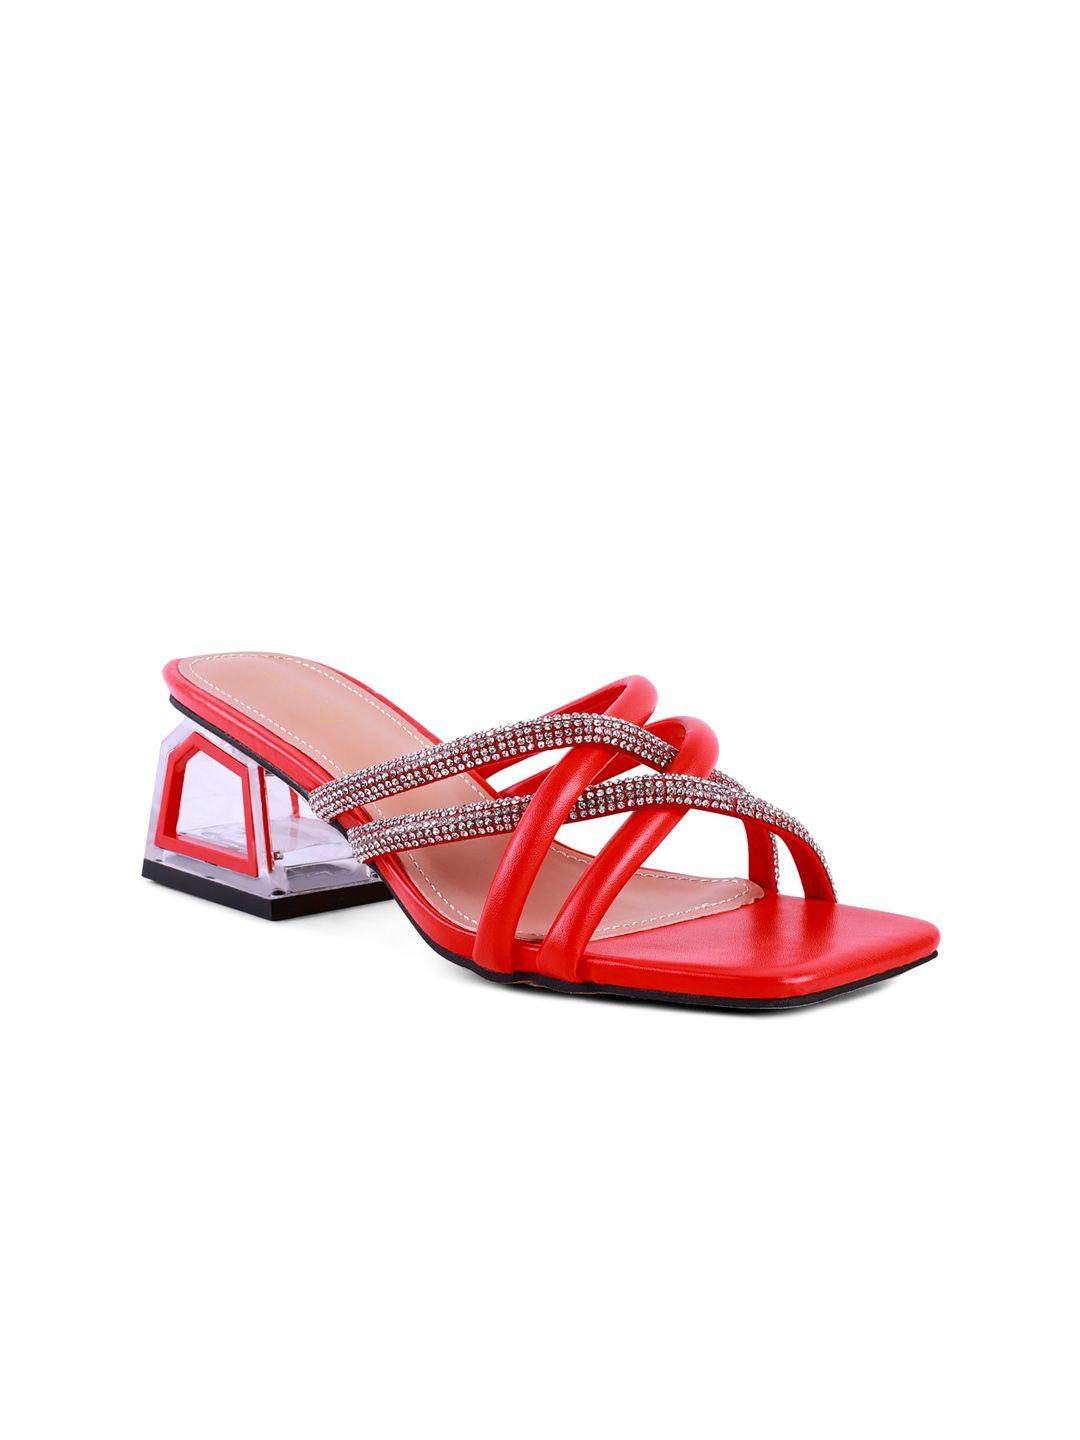 london-rag-women-red-embellished-pu-party-block-sandals